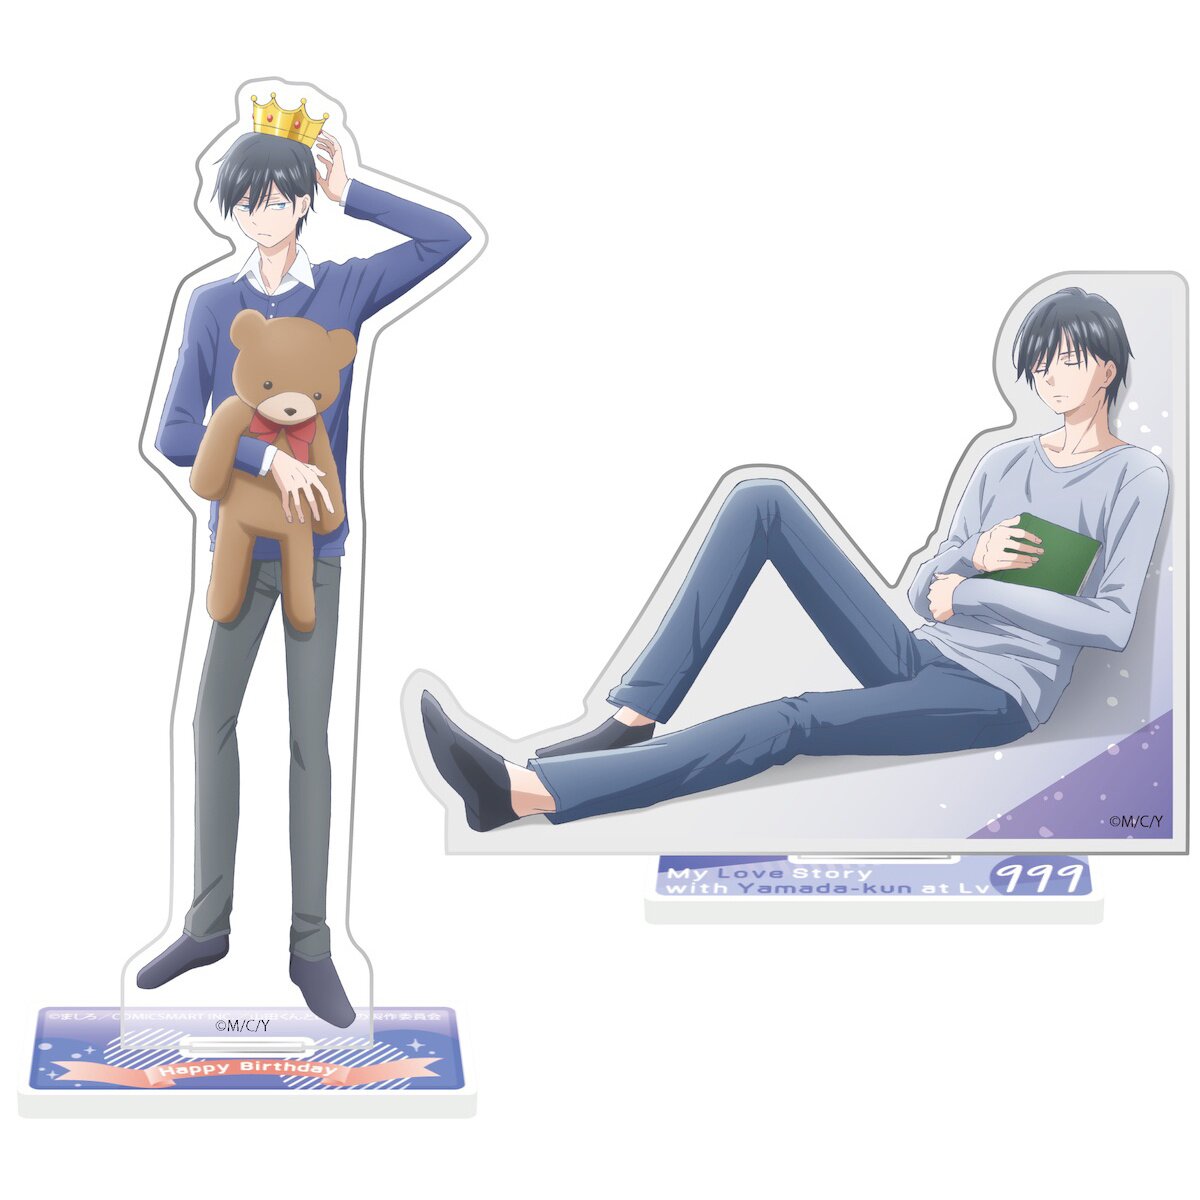 My Love Story with Yamada-kun at Lv999 Official USA Website